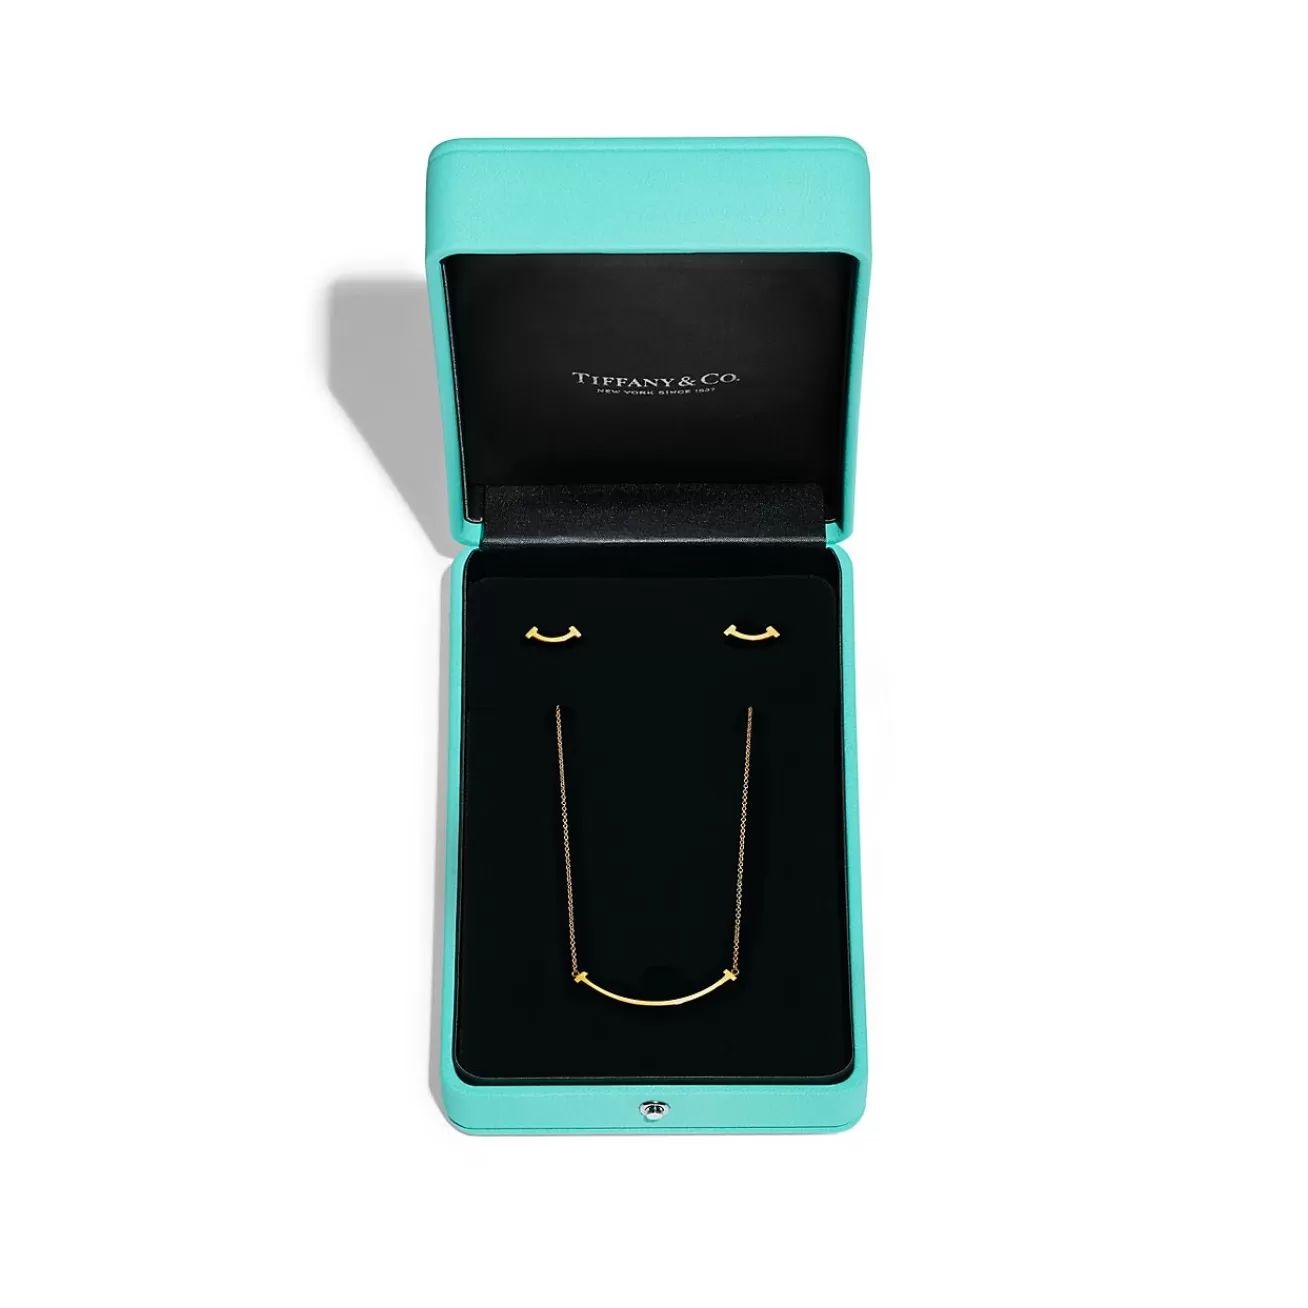 Tiffany & Co. Tiffany T Smile Pendant and Earrings Set in Yellow Gold | ^ Gifts for Her | Her